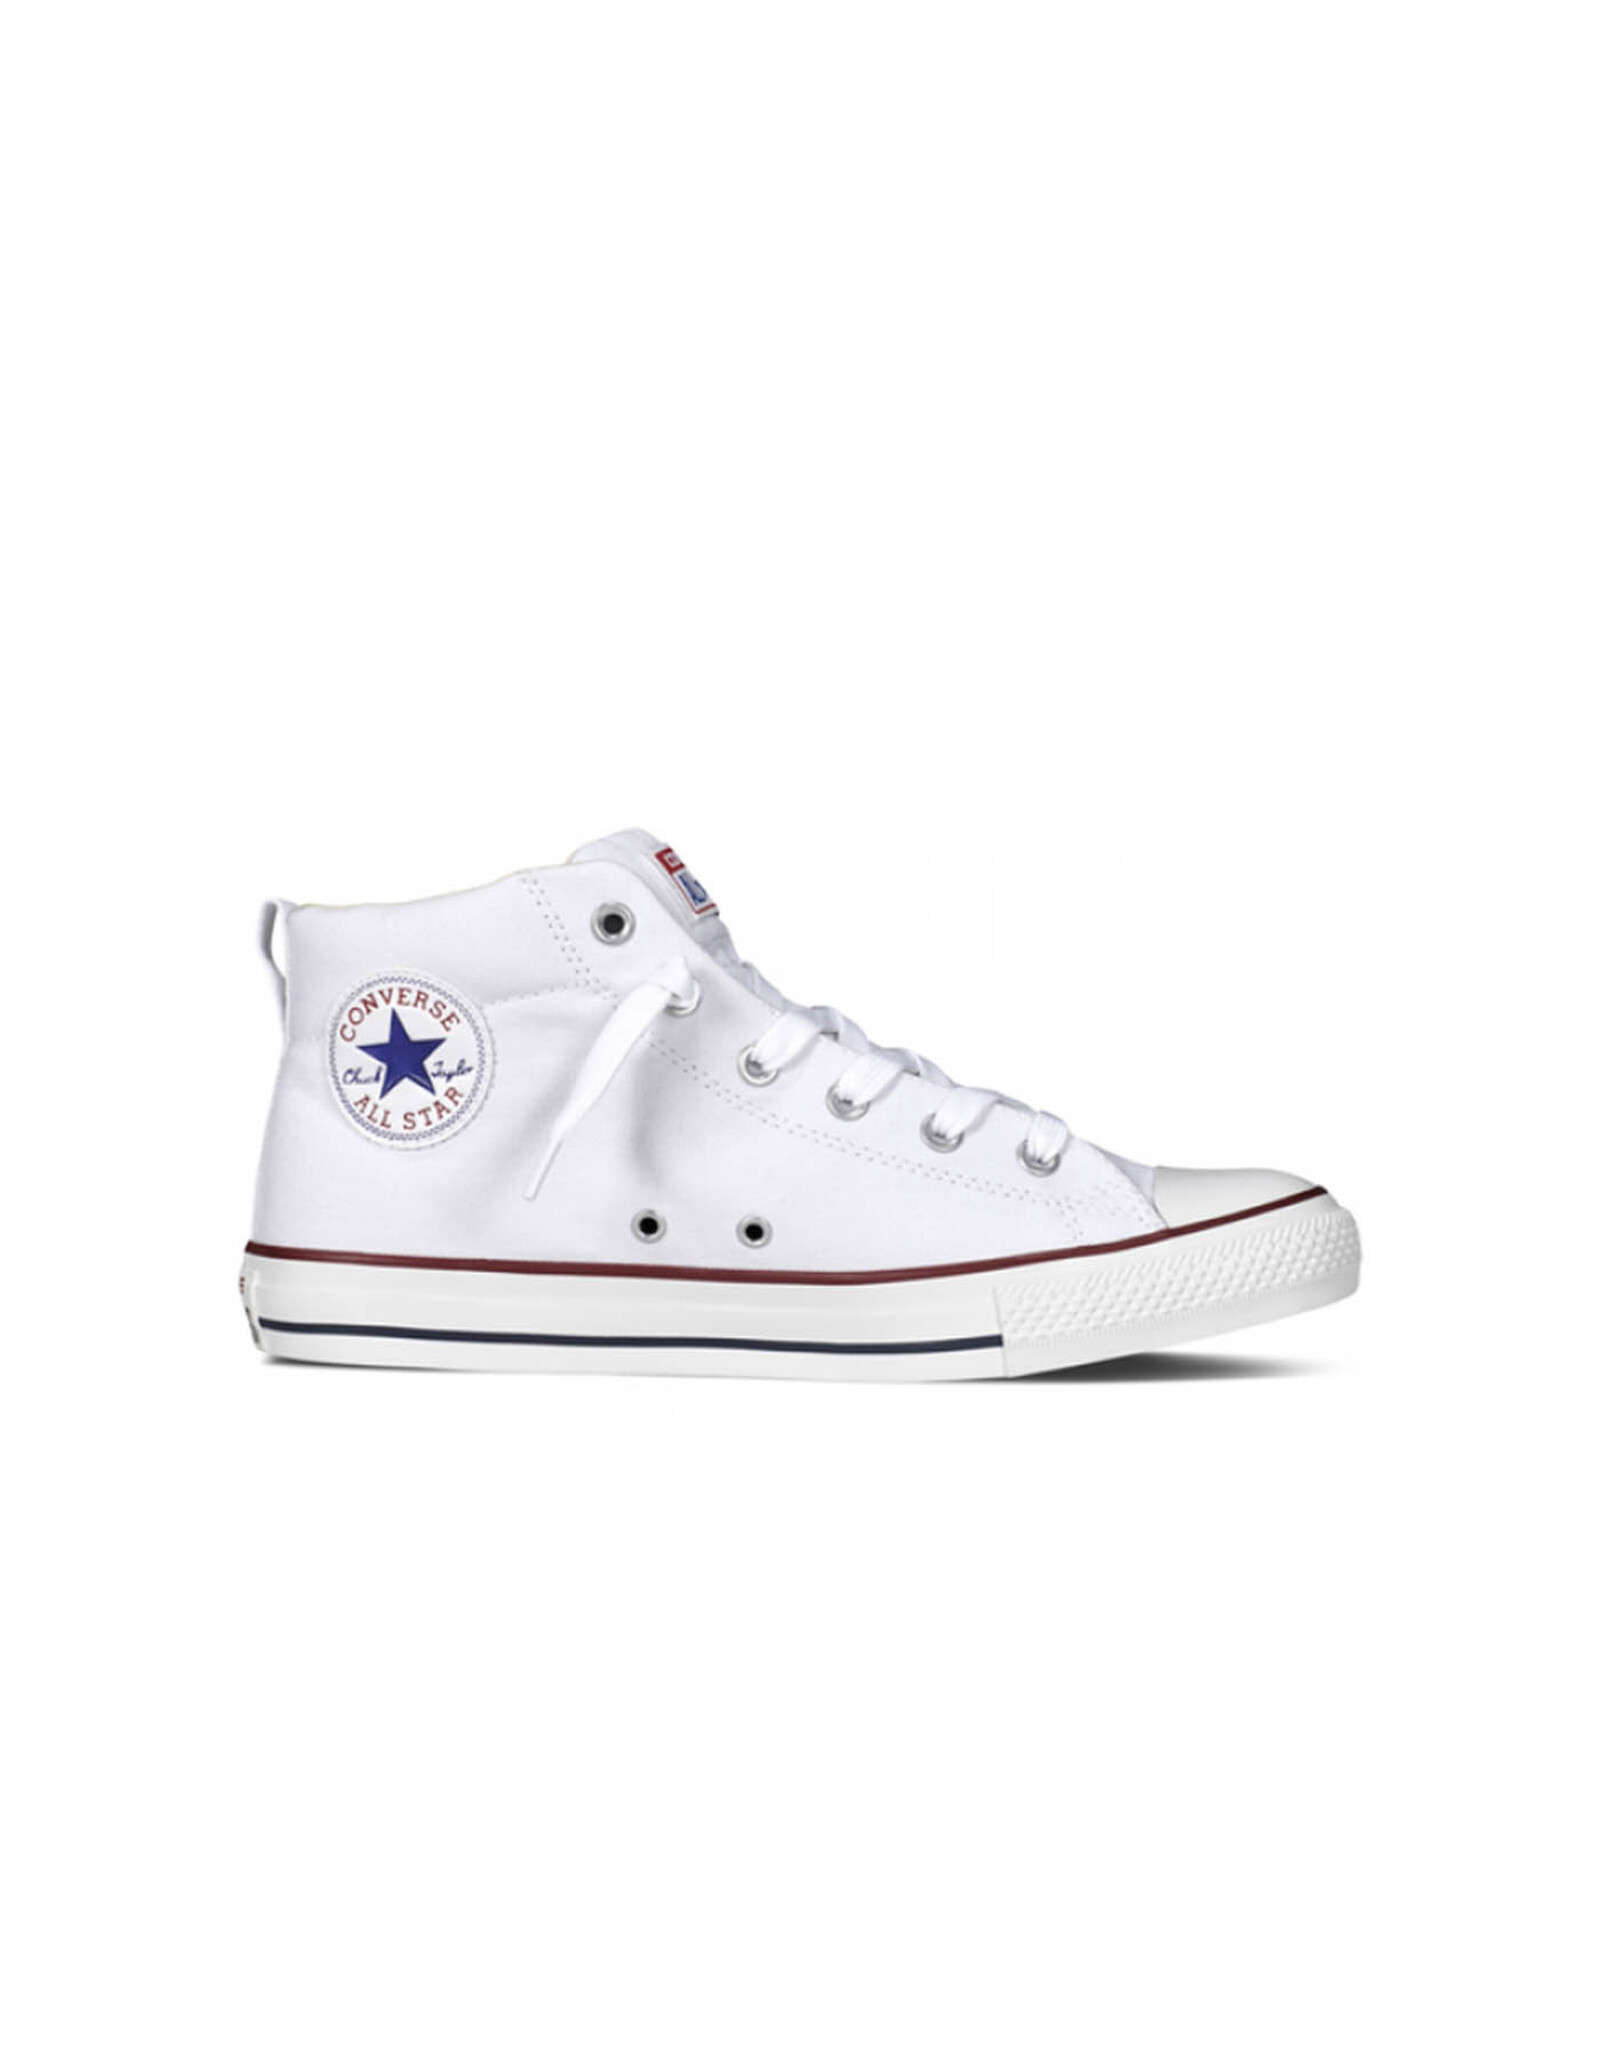 CHUCK TAYLOR STREET MID WHITE NATURAL C598OP - 149546C